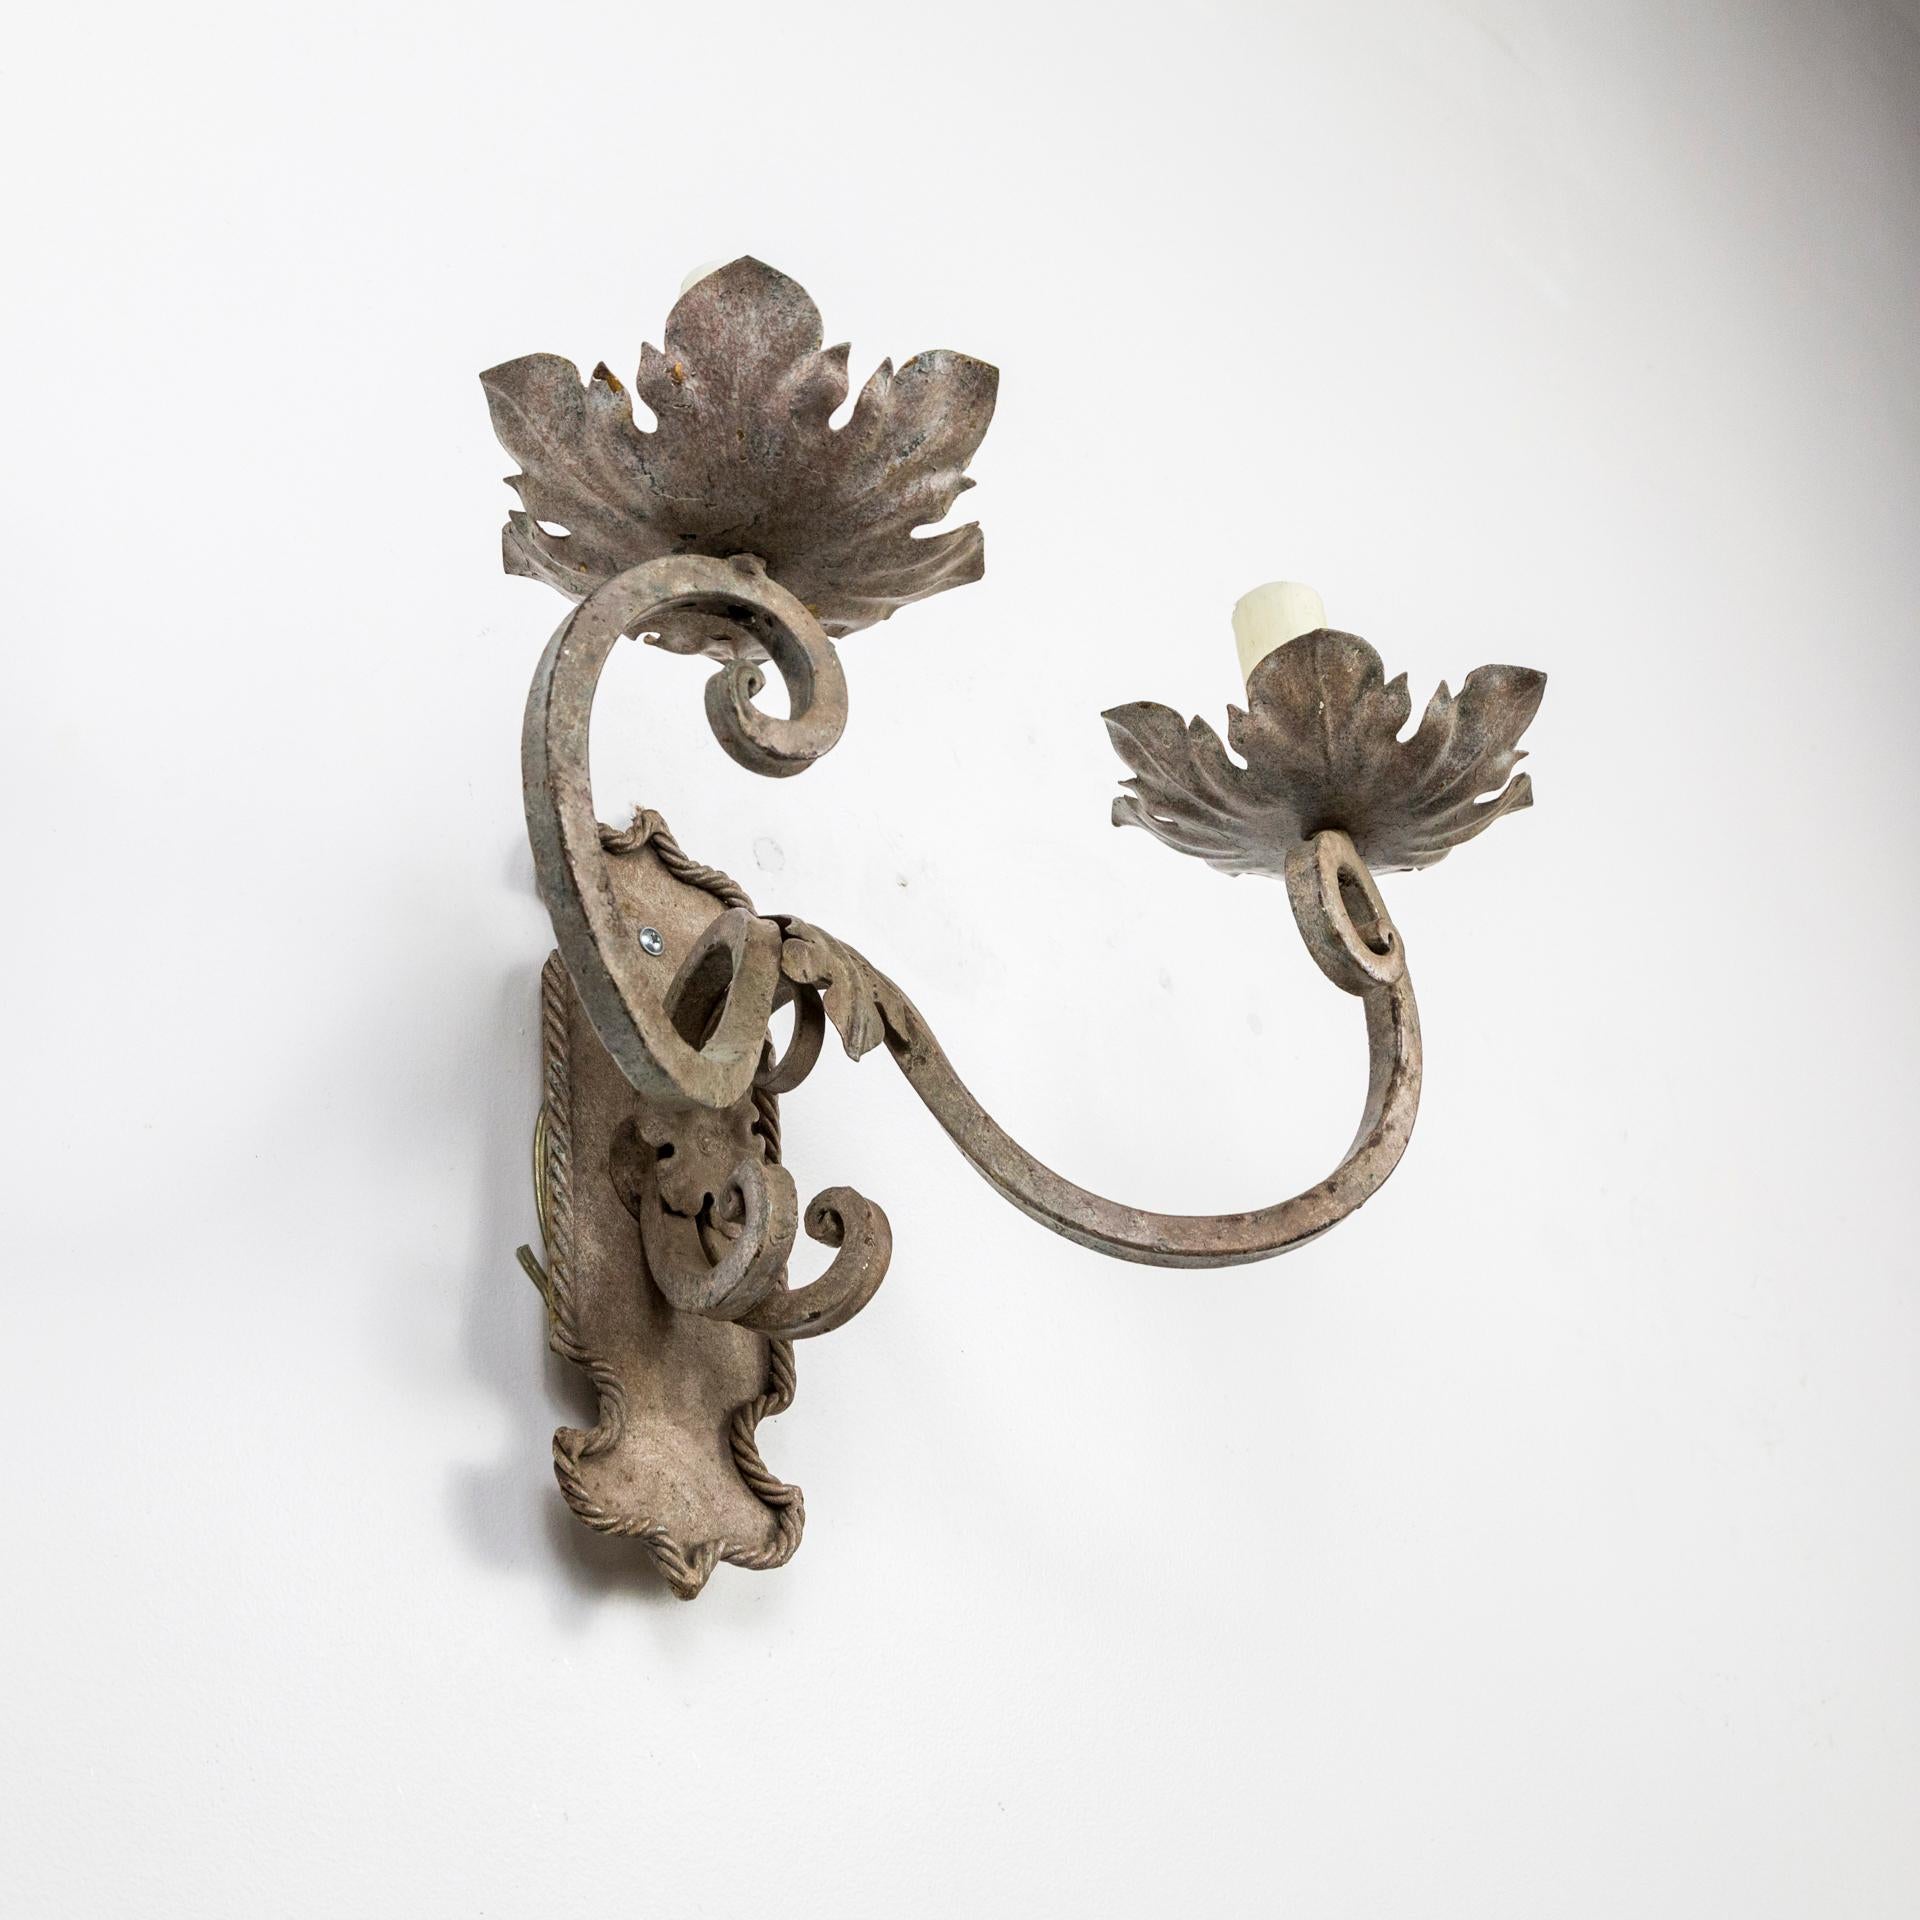 Decoratively faux painted metal sconces in a fresh, warm tone; two scroll arms and shield backplate with rope and leaf details and wide, foliate bobeches, and wax covered candle covers, 1990s. Measures: 18